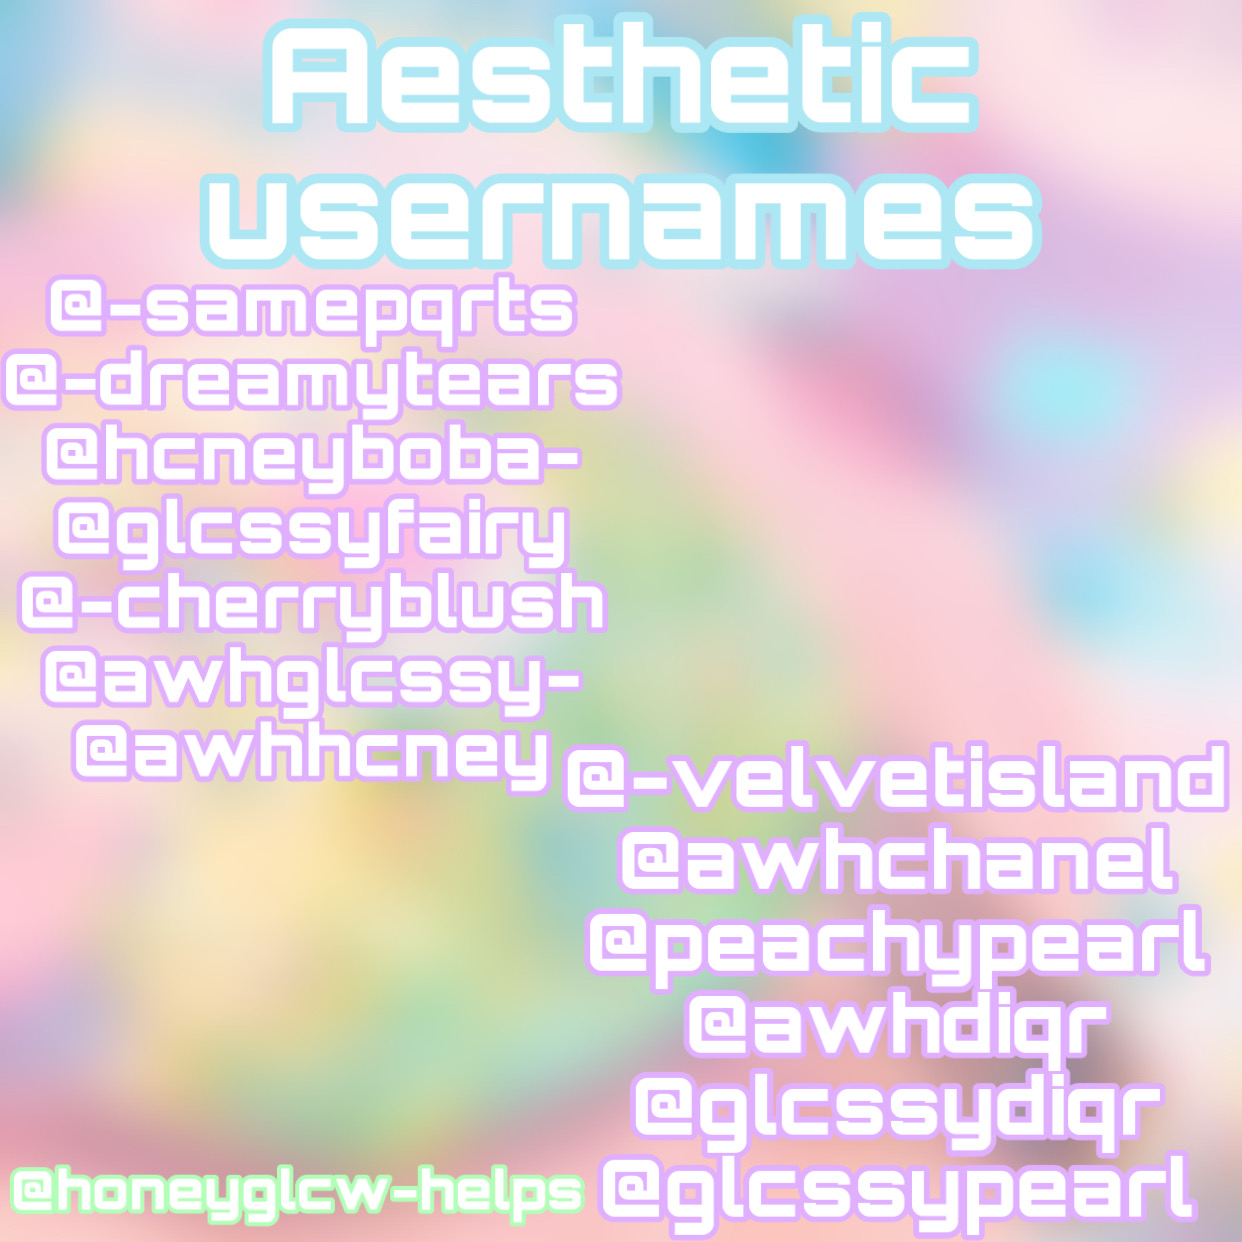 What Are Good Usernames For Roblox That Are Not Taken - aesthetic roblox usernames 2020 generator